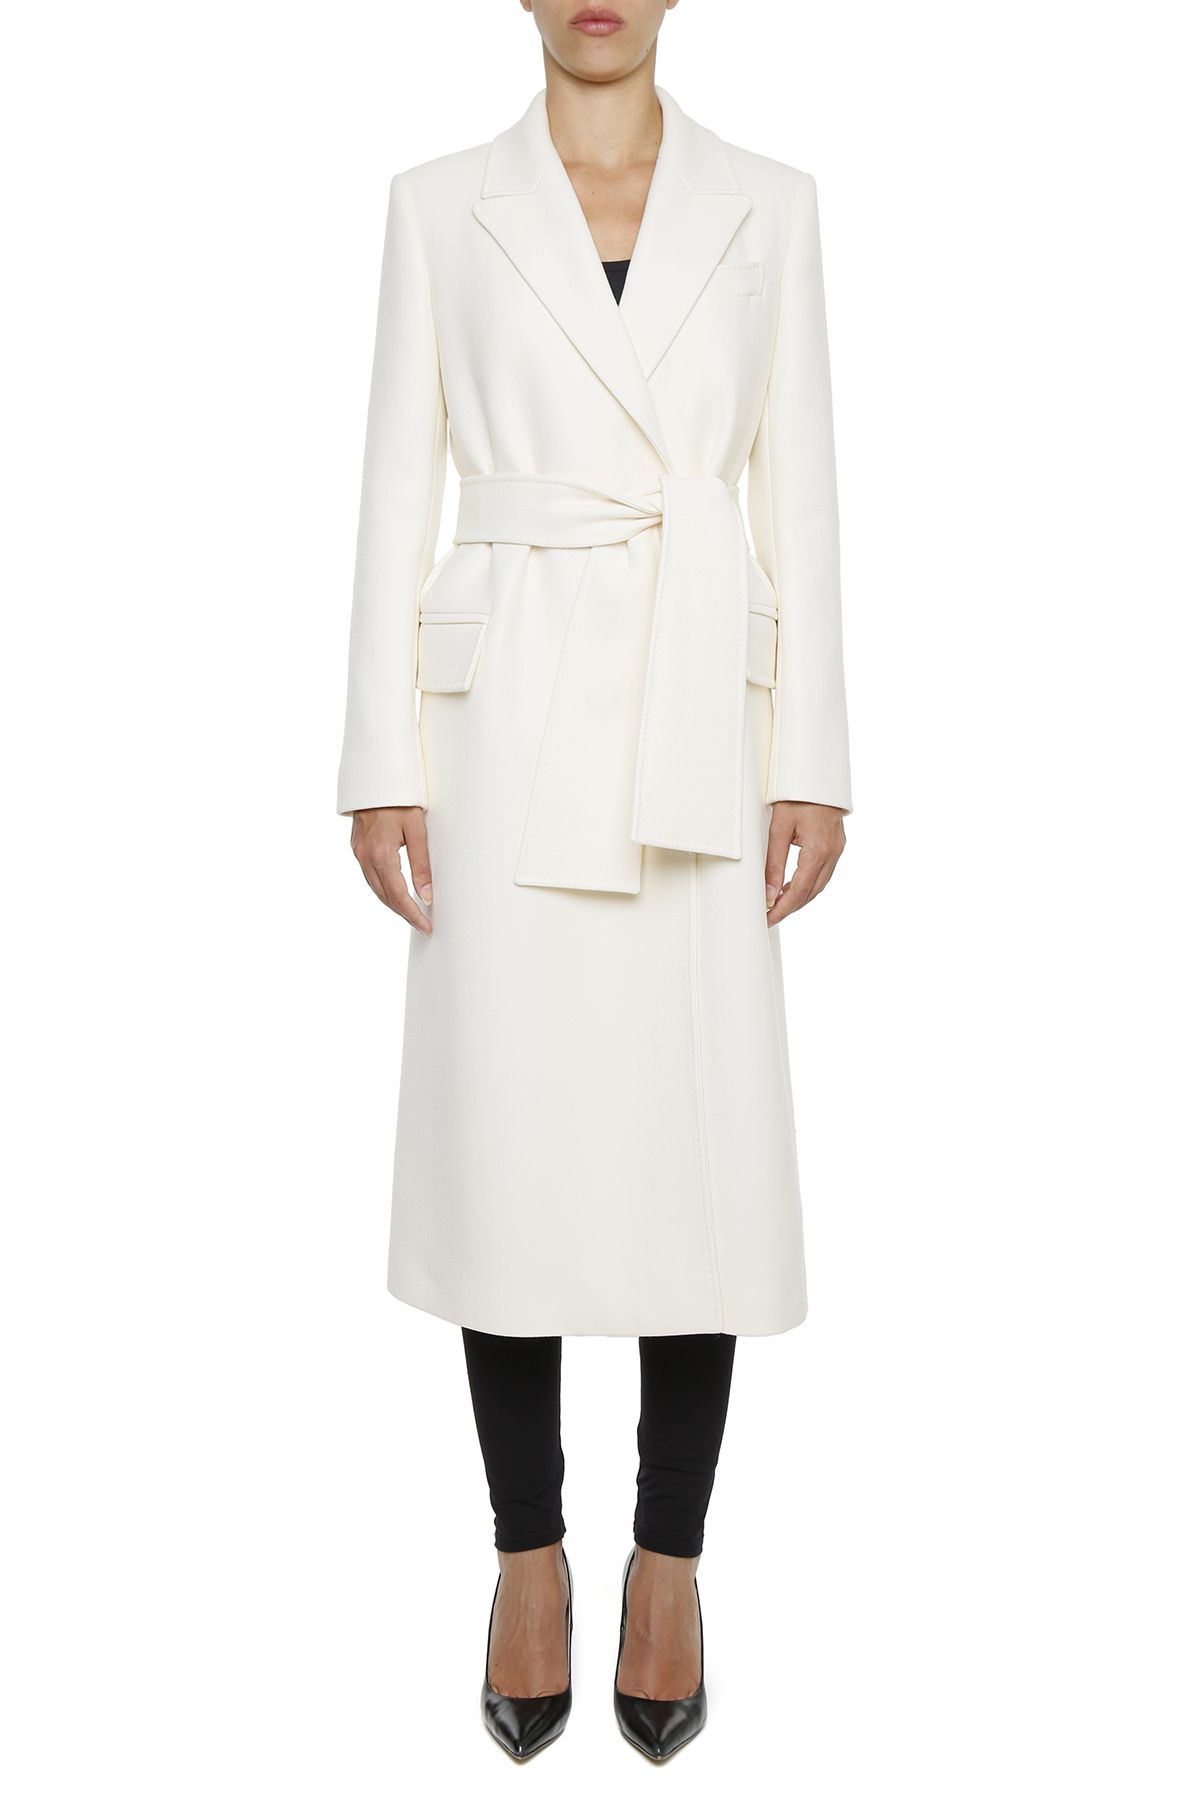 TOM FORD Tailored Wool Long Coat With Belt, White | ModeSens